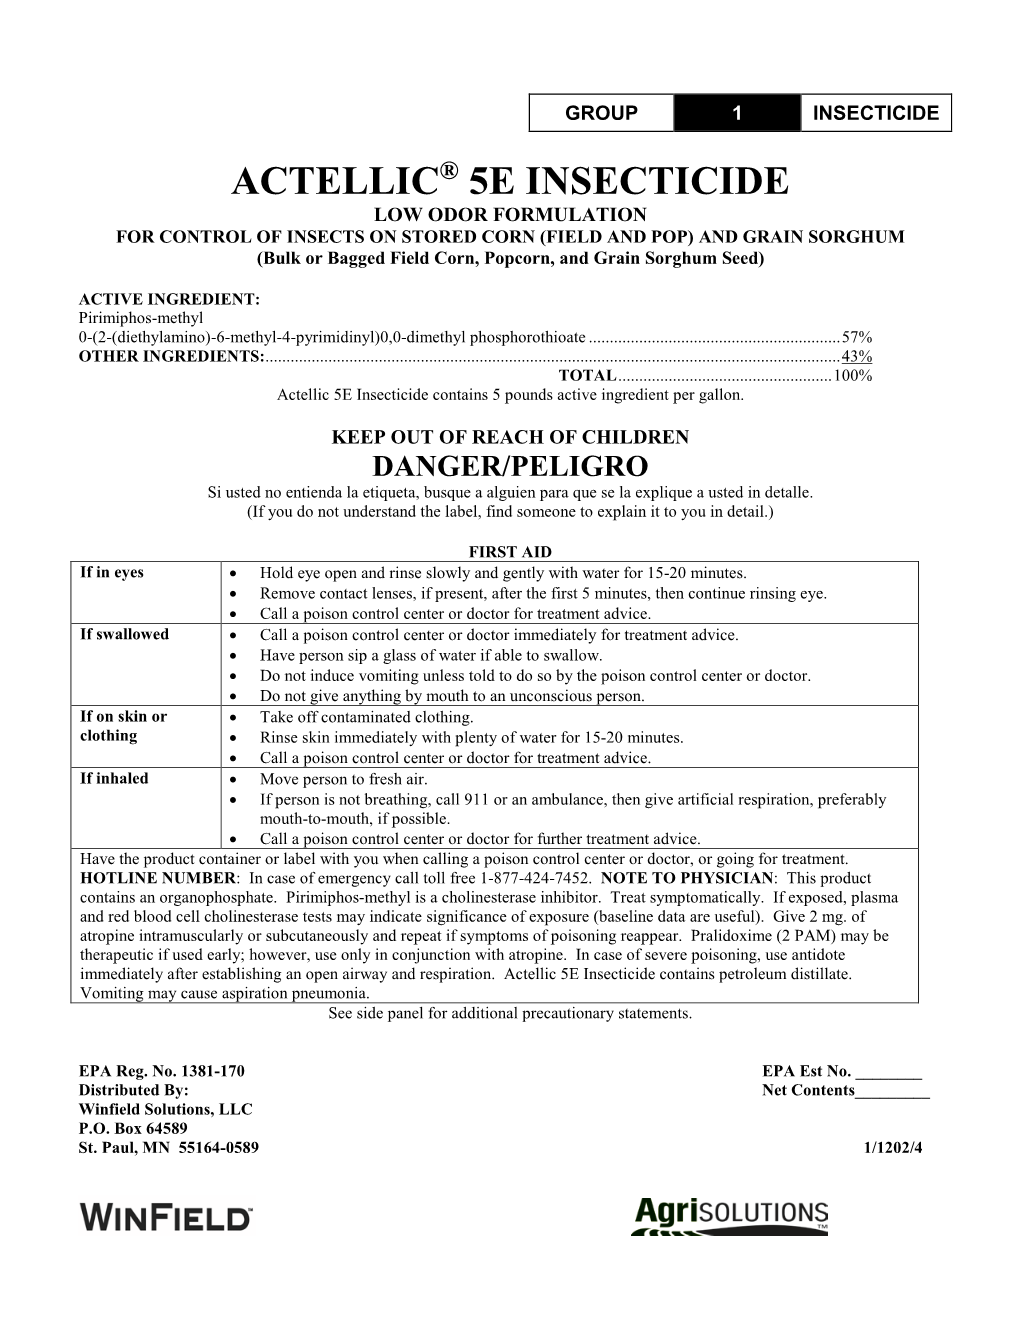 Actellic 5E Insecticide Contains 5 Pounds Active Ingredient Per Gallon